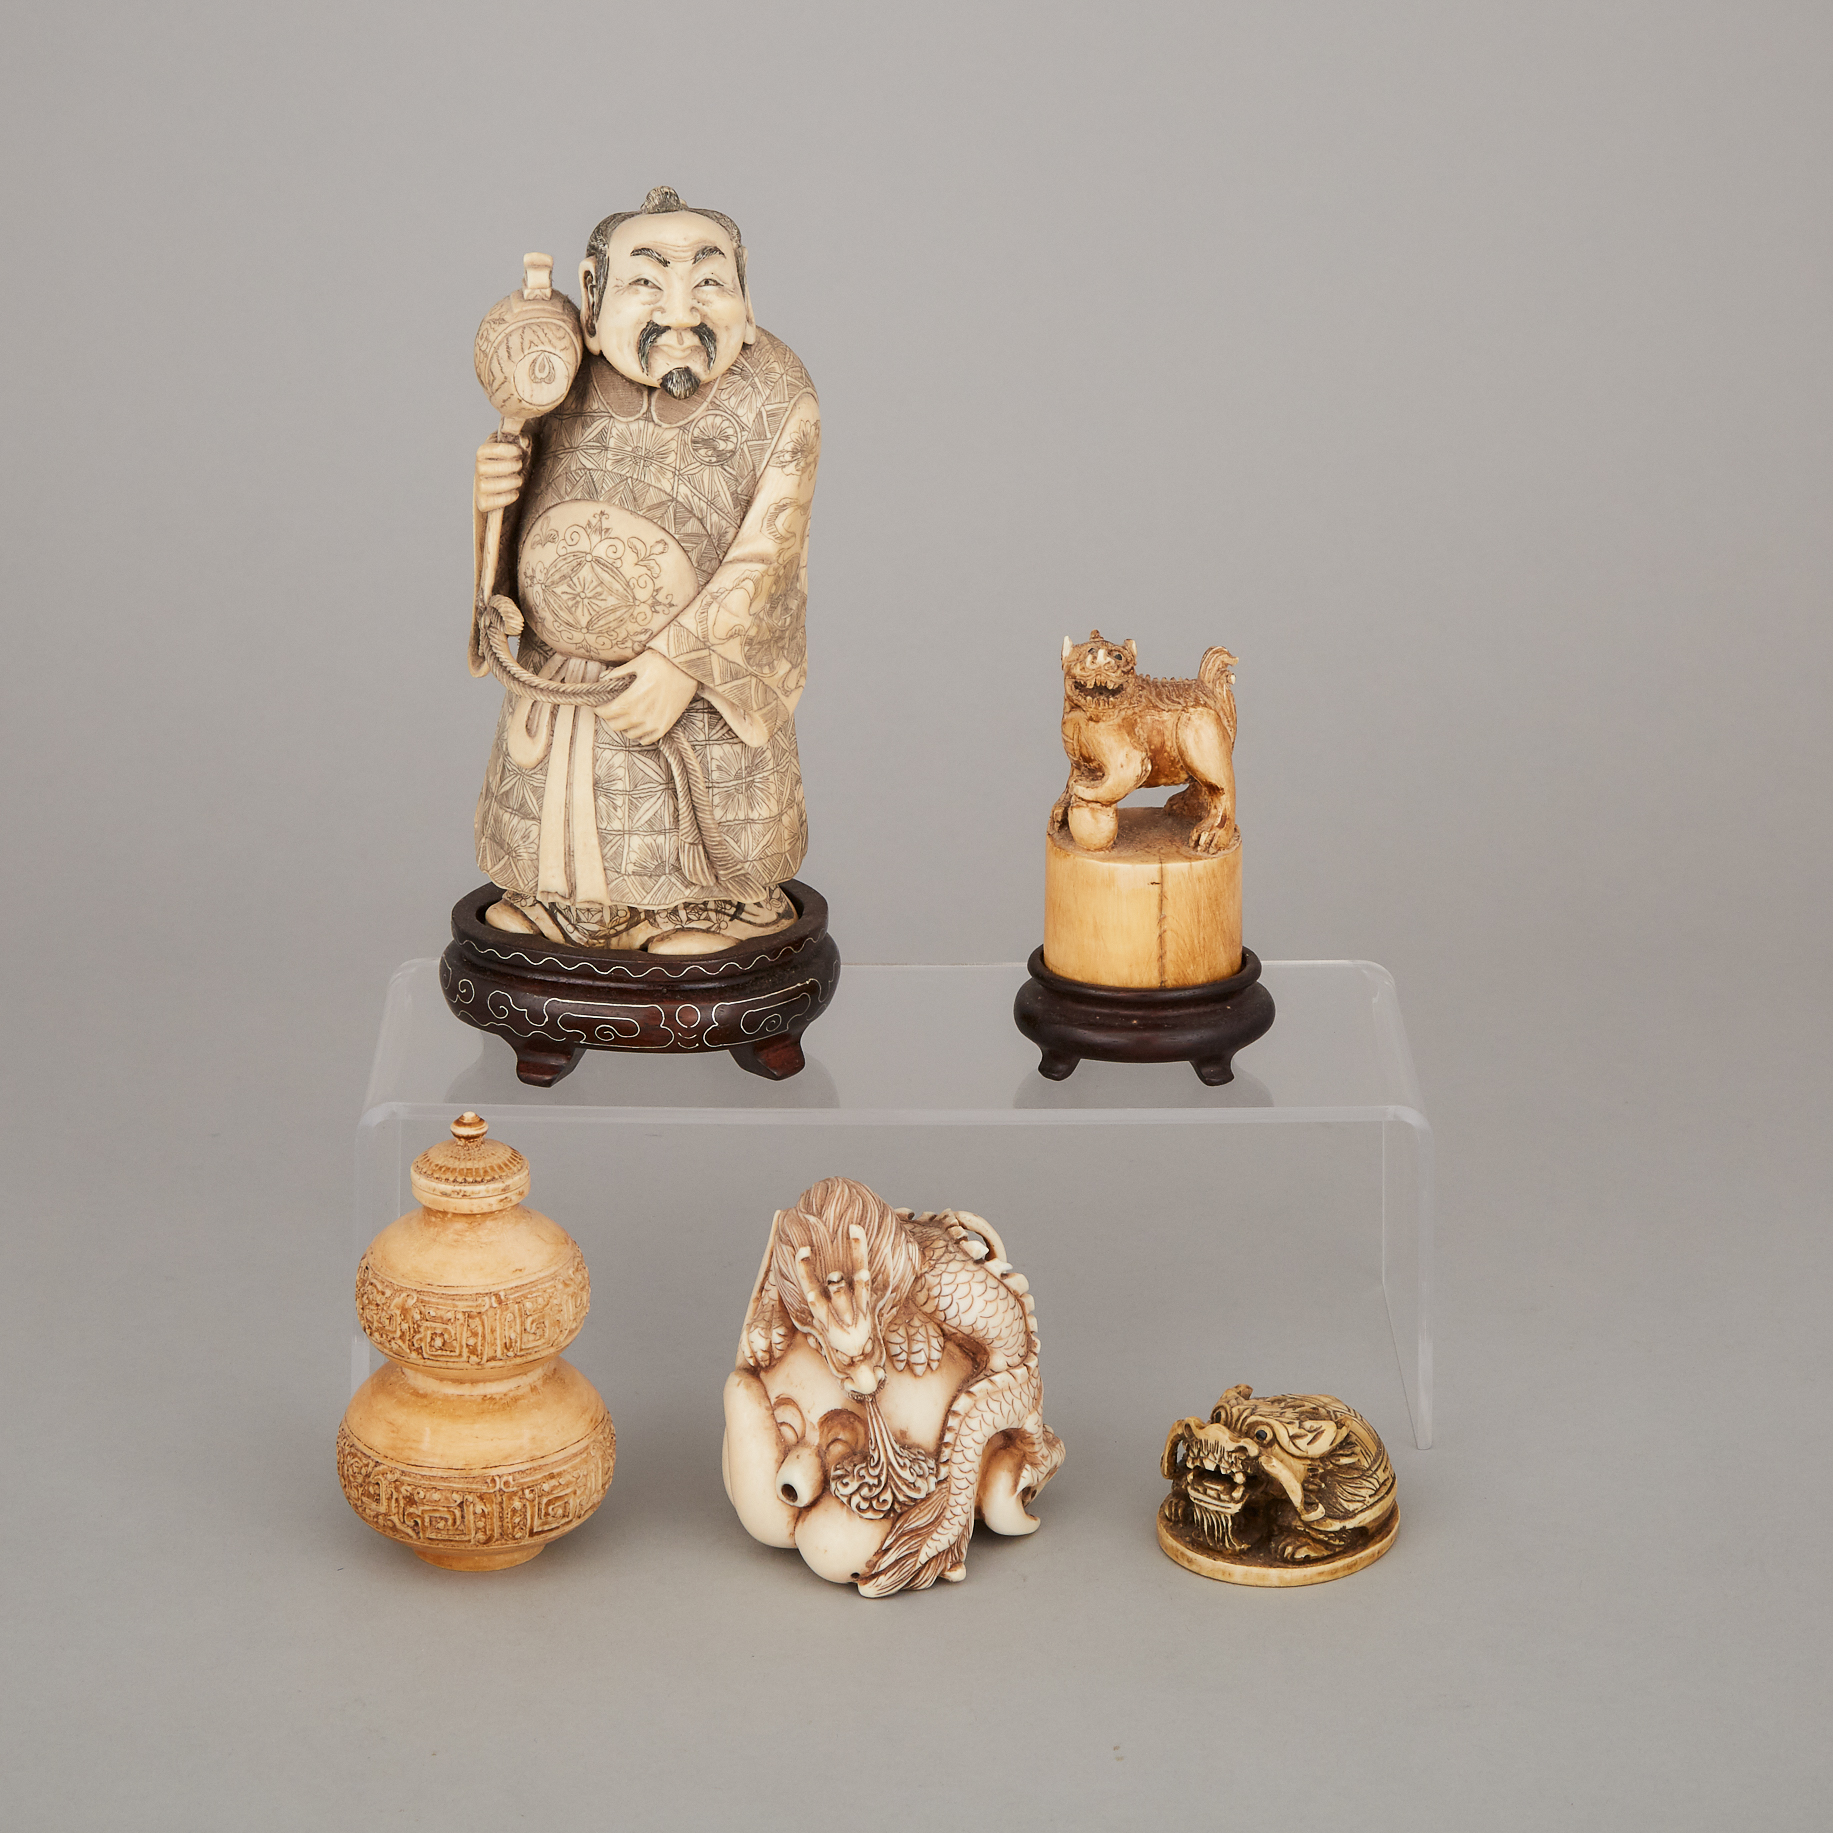 A Group of Five Ivory Carved Items, Early 20th Century